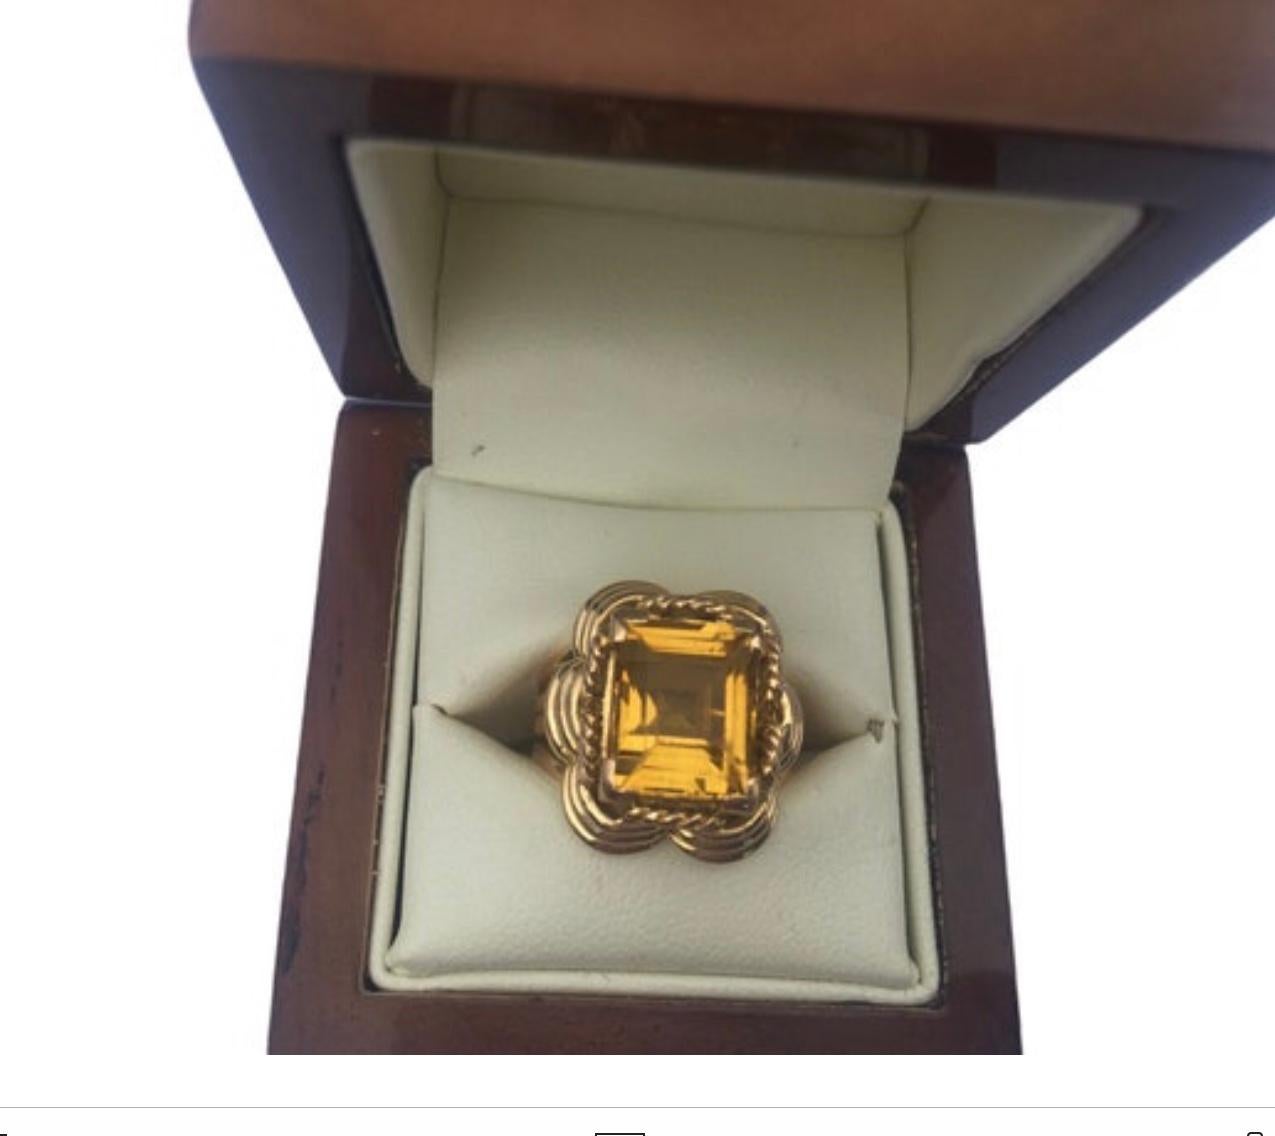 Antique french 18 carat gold ring set with an archer cut citrine.
French hallmark eagles head for 18 carat gold
Era 1950’s 
In very good condition 
Wear consistent with age and use 
Ring size EU 50 US 5 3/4 UK L 
Weight 9.9 g
Size of the ring head